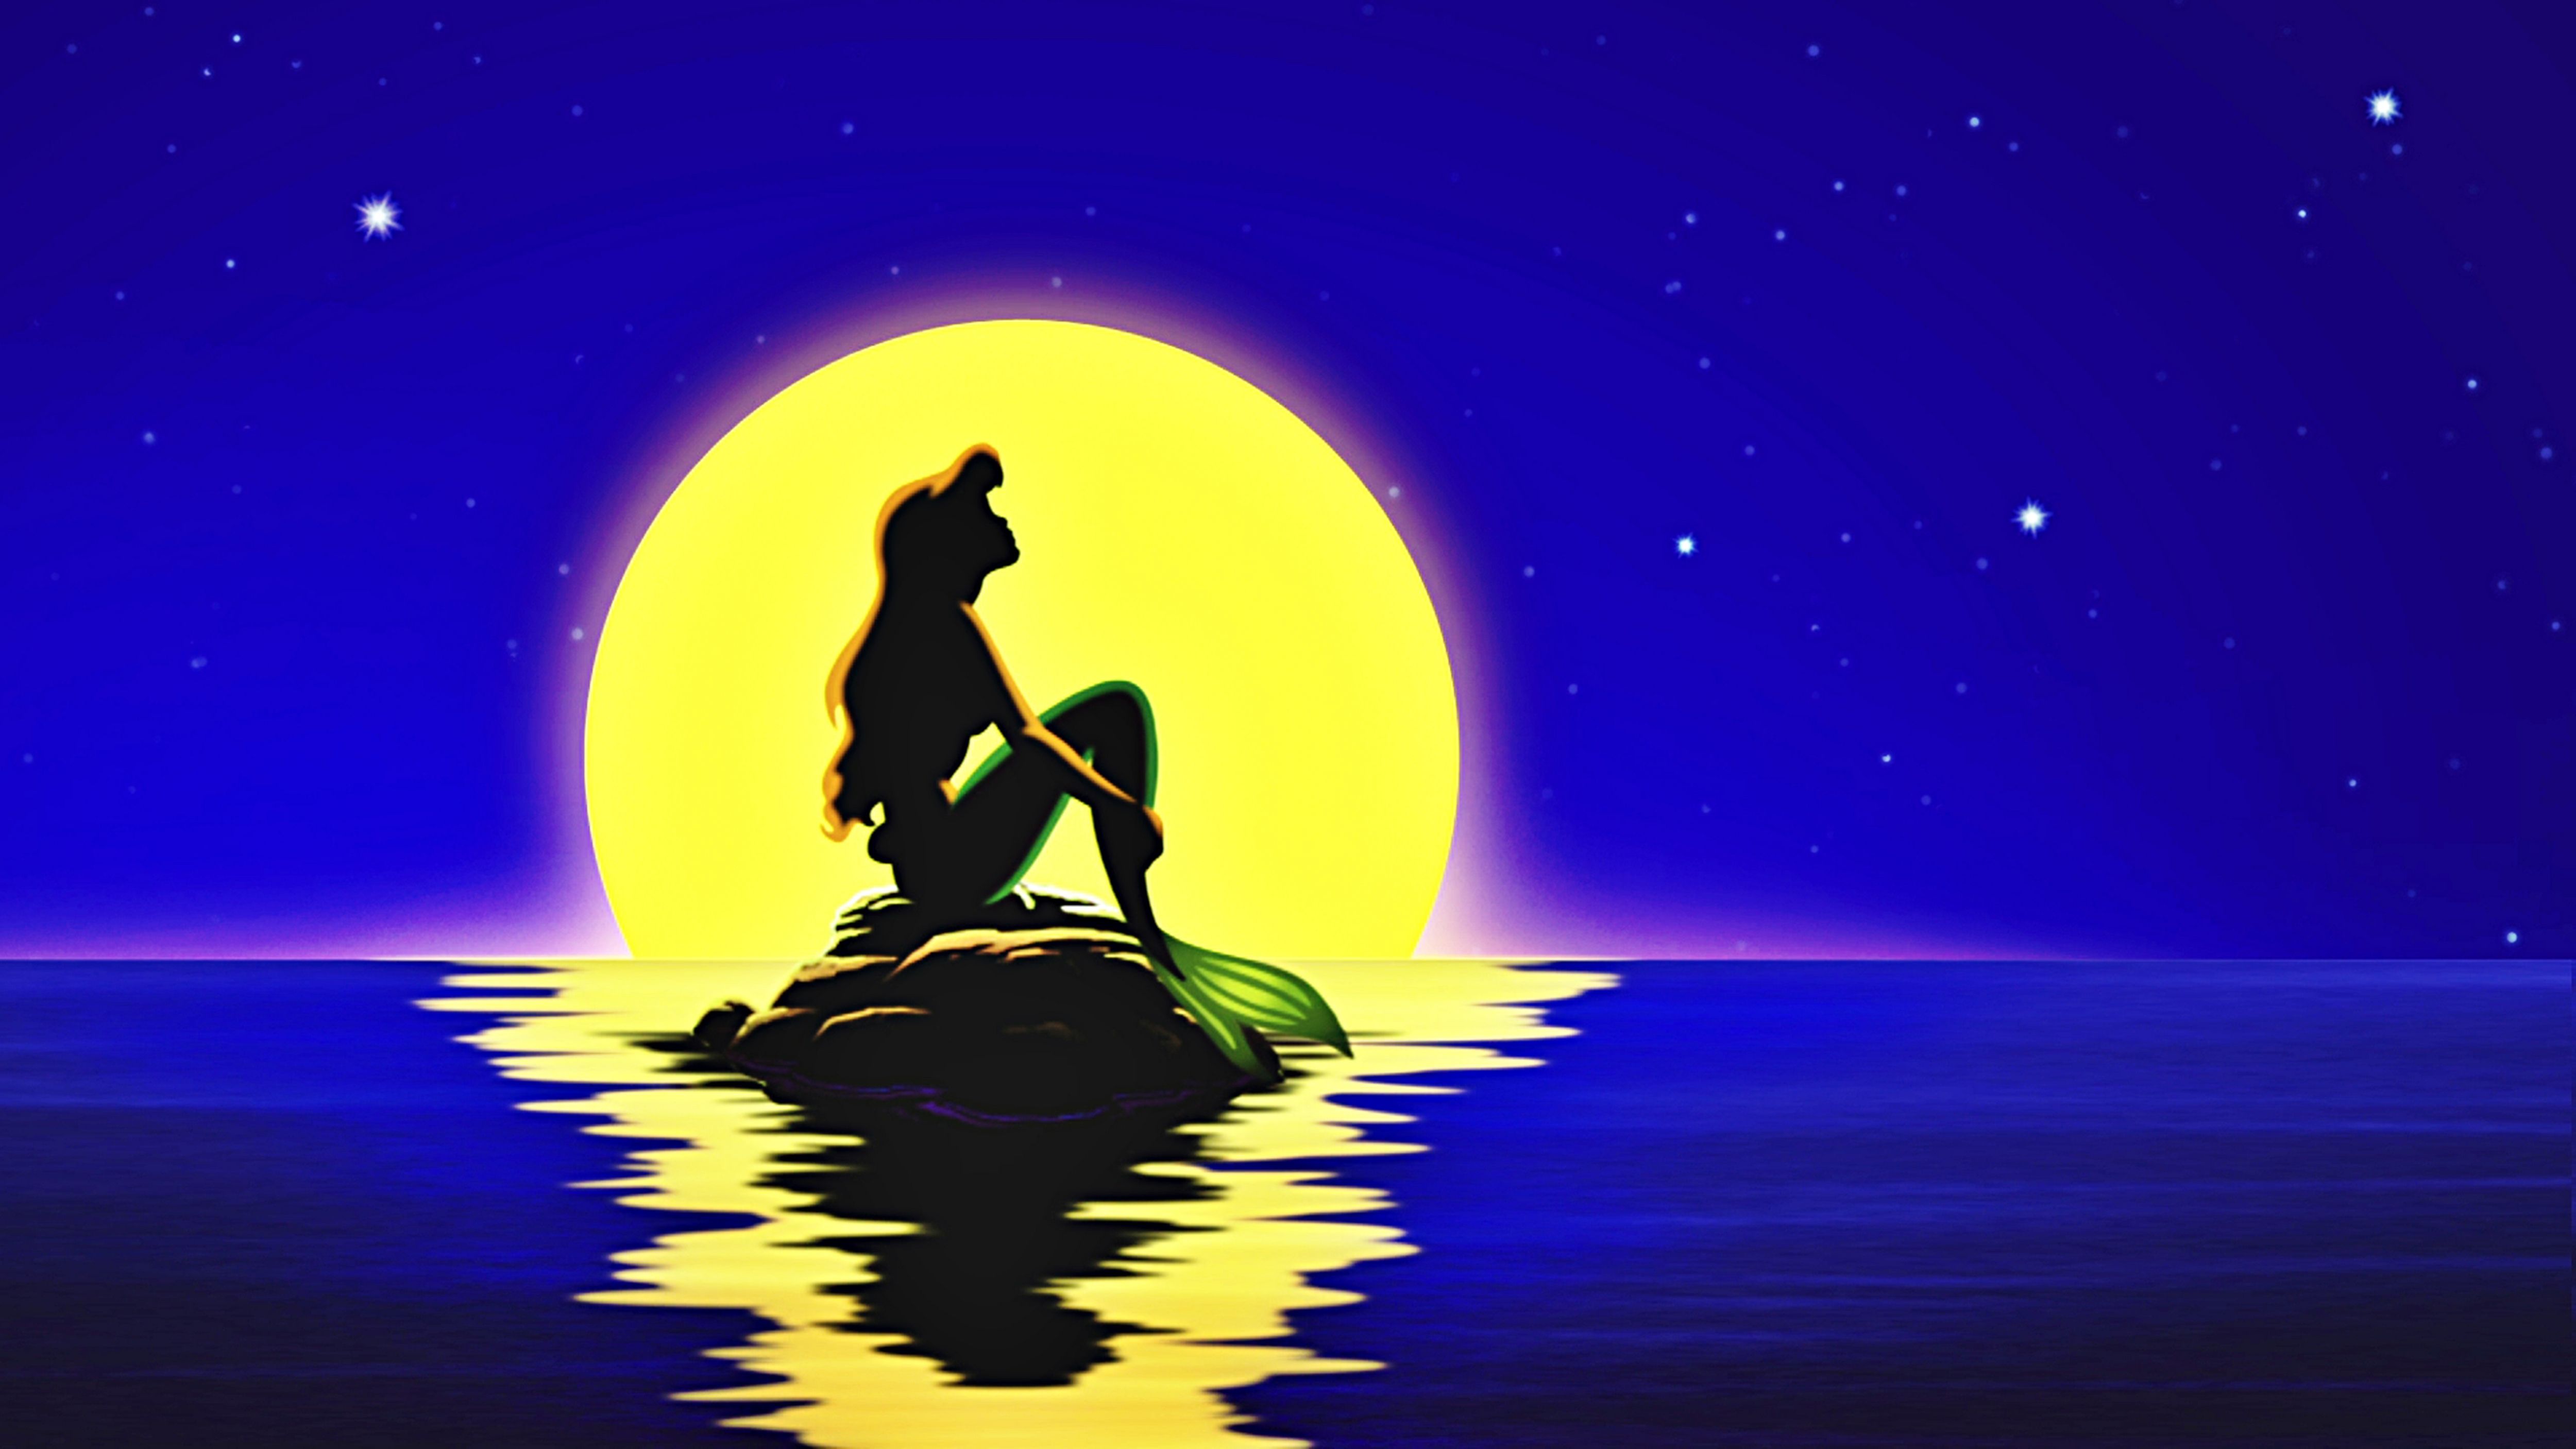 Disney Wallpapers HD Full HD Pictures